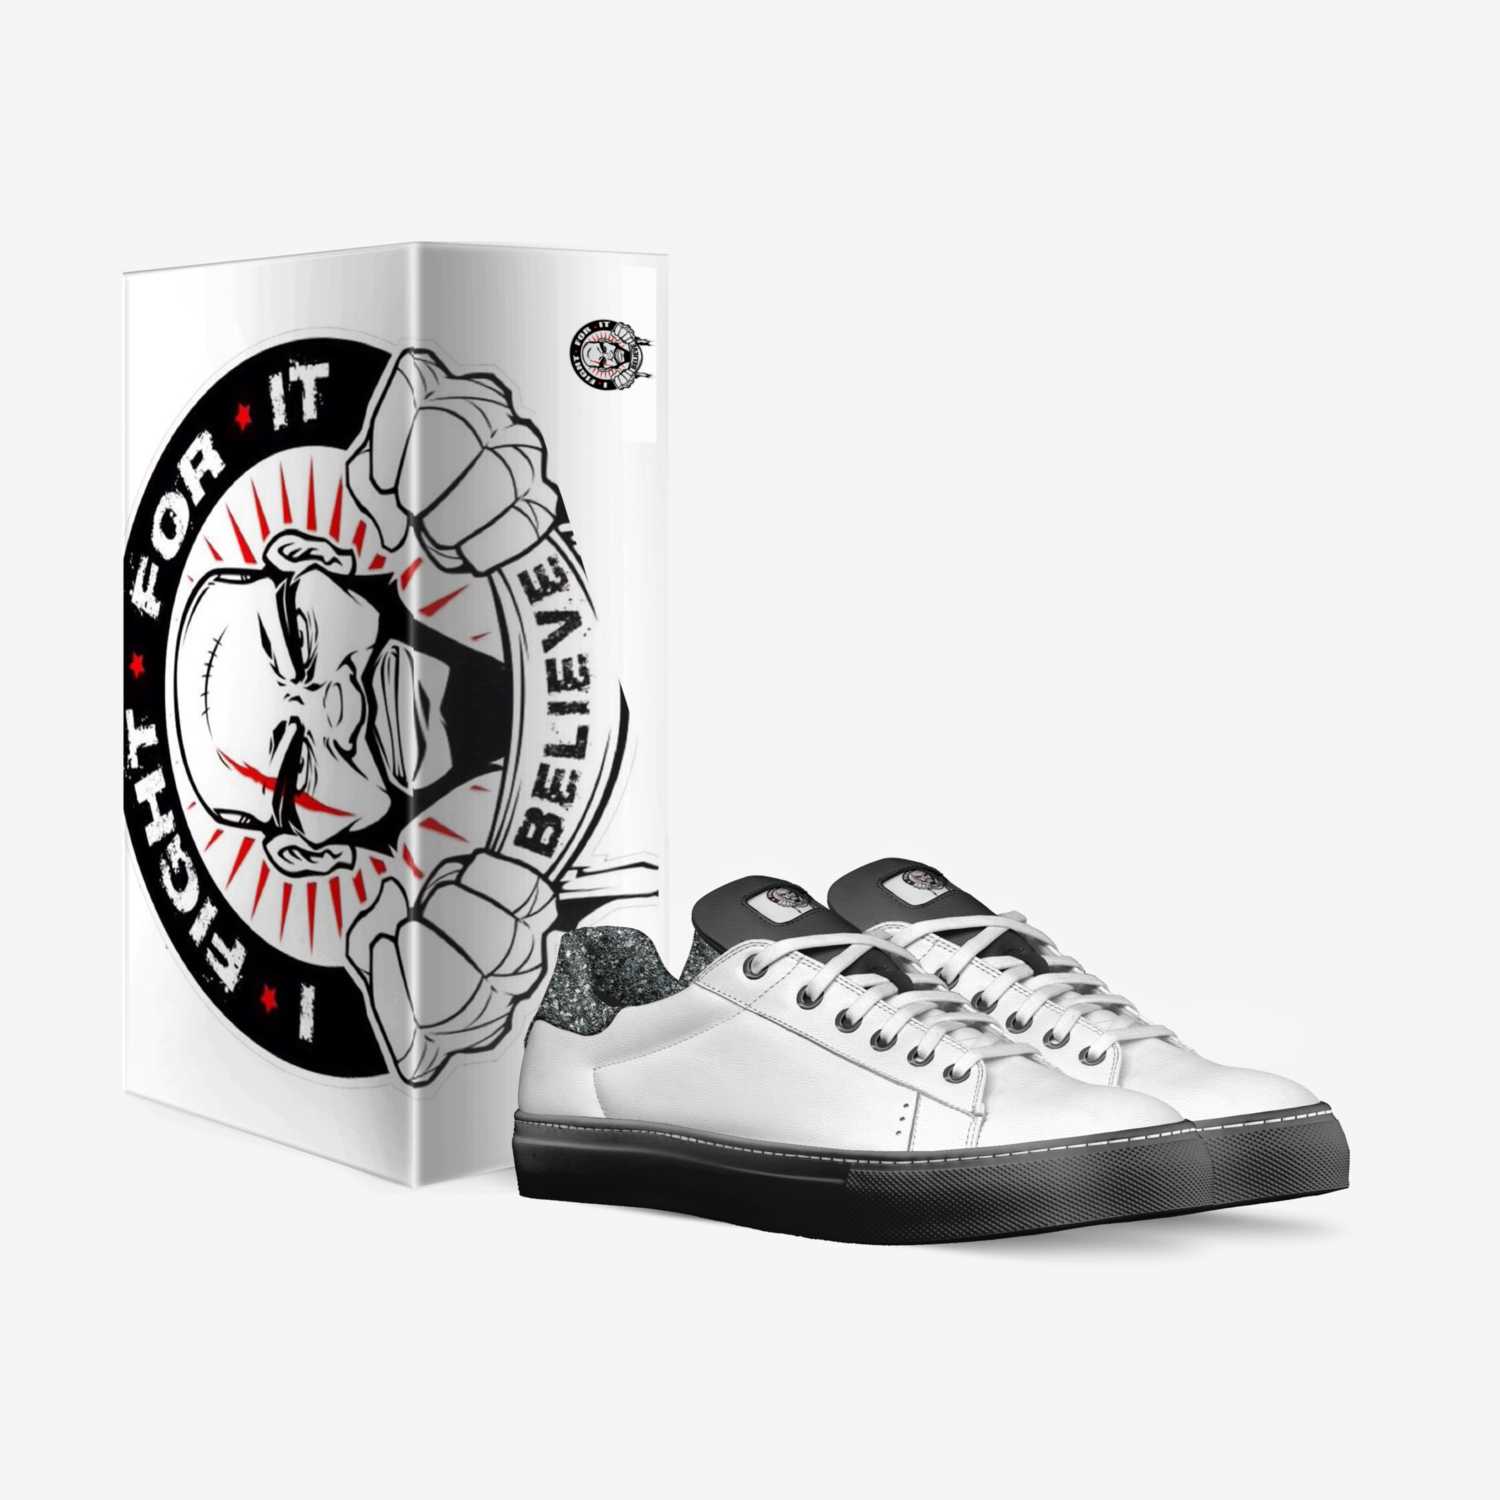 THE TKO custom made in Italy shoes by Luther Smith | Box view